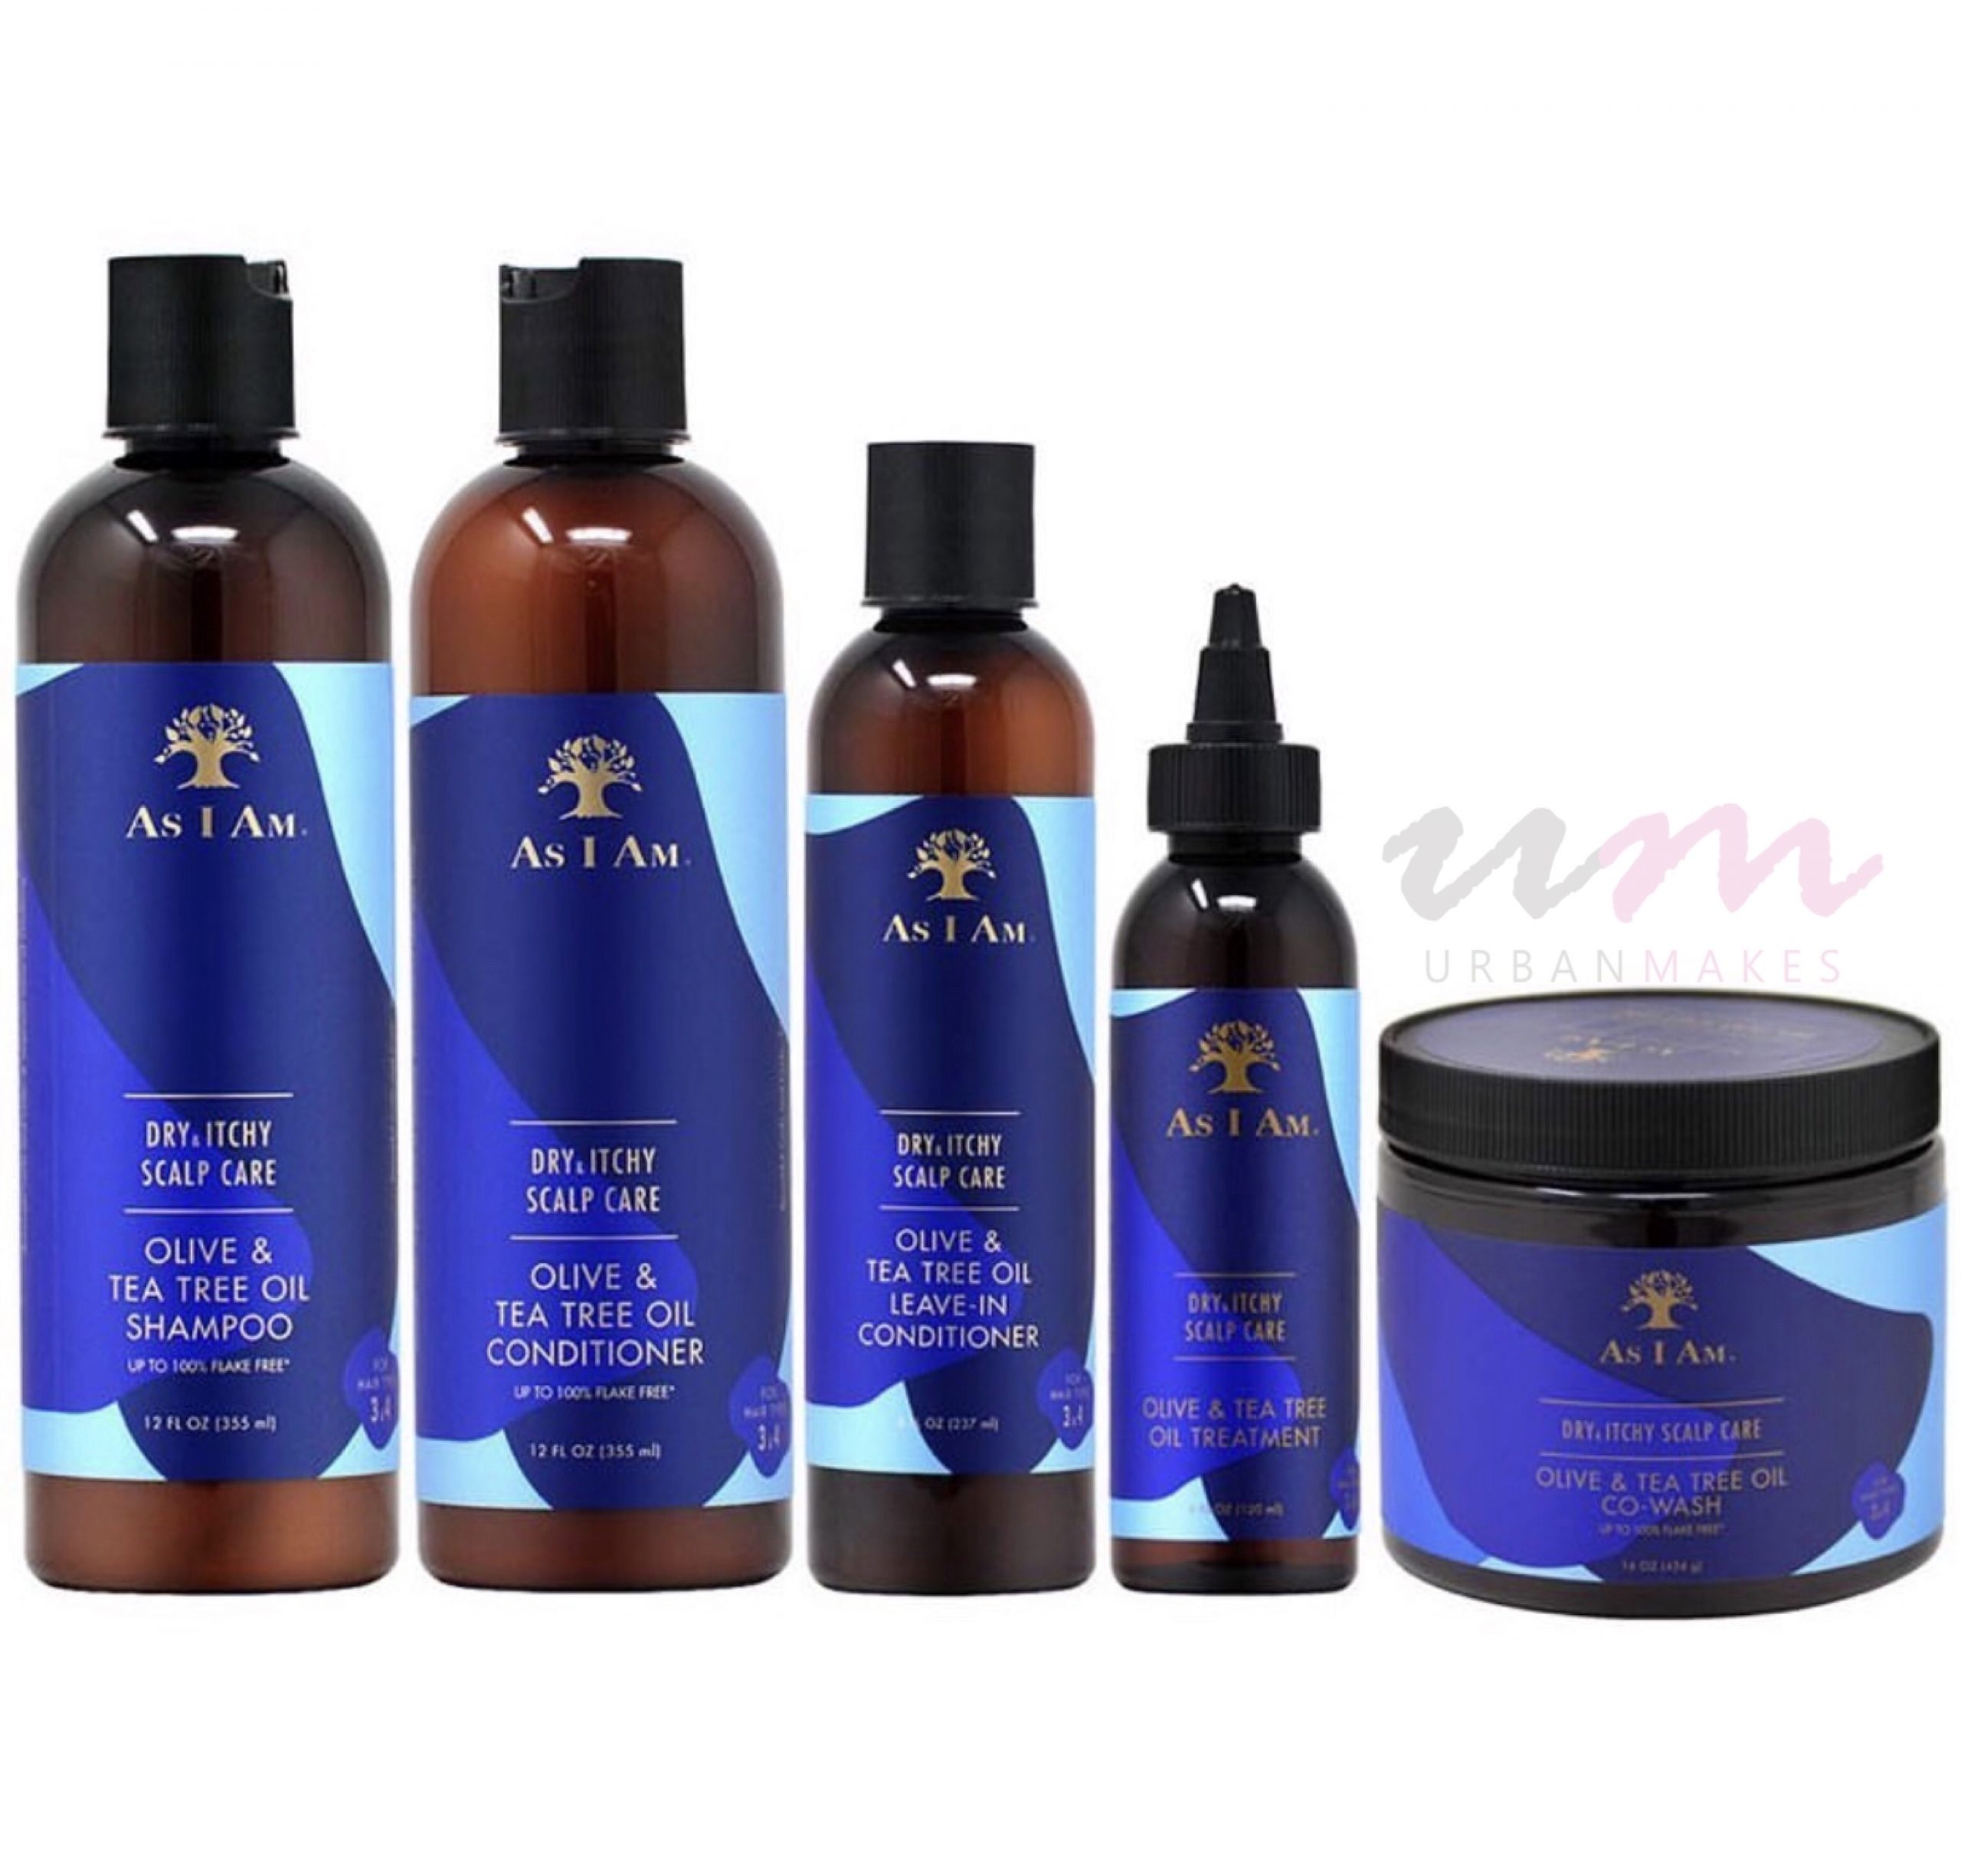 As I Am Dandruff Itch Relief Bundle Urbanmakes